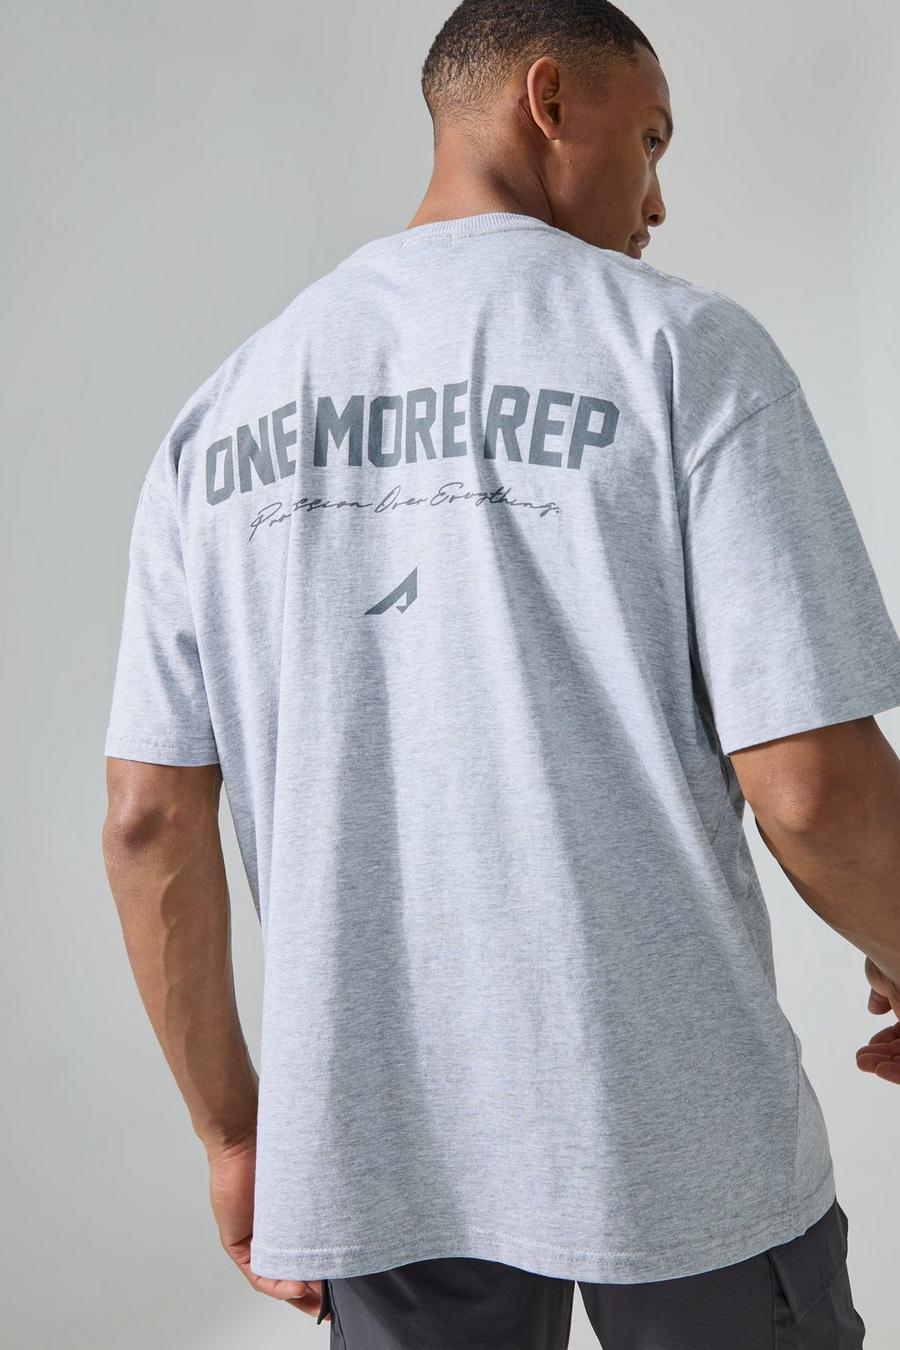 T-shirt oversize Man Active di One More Rep, Grey marl image number 1